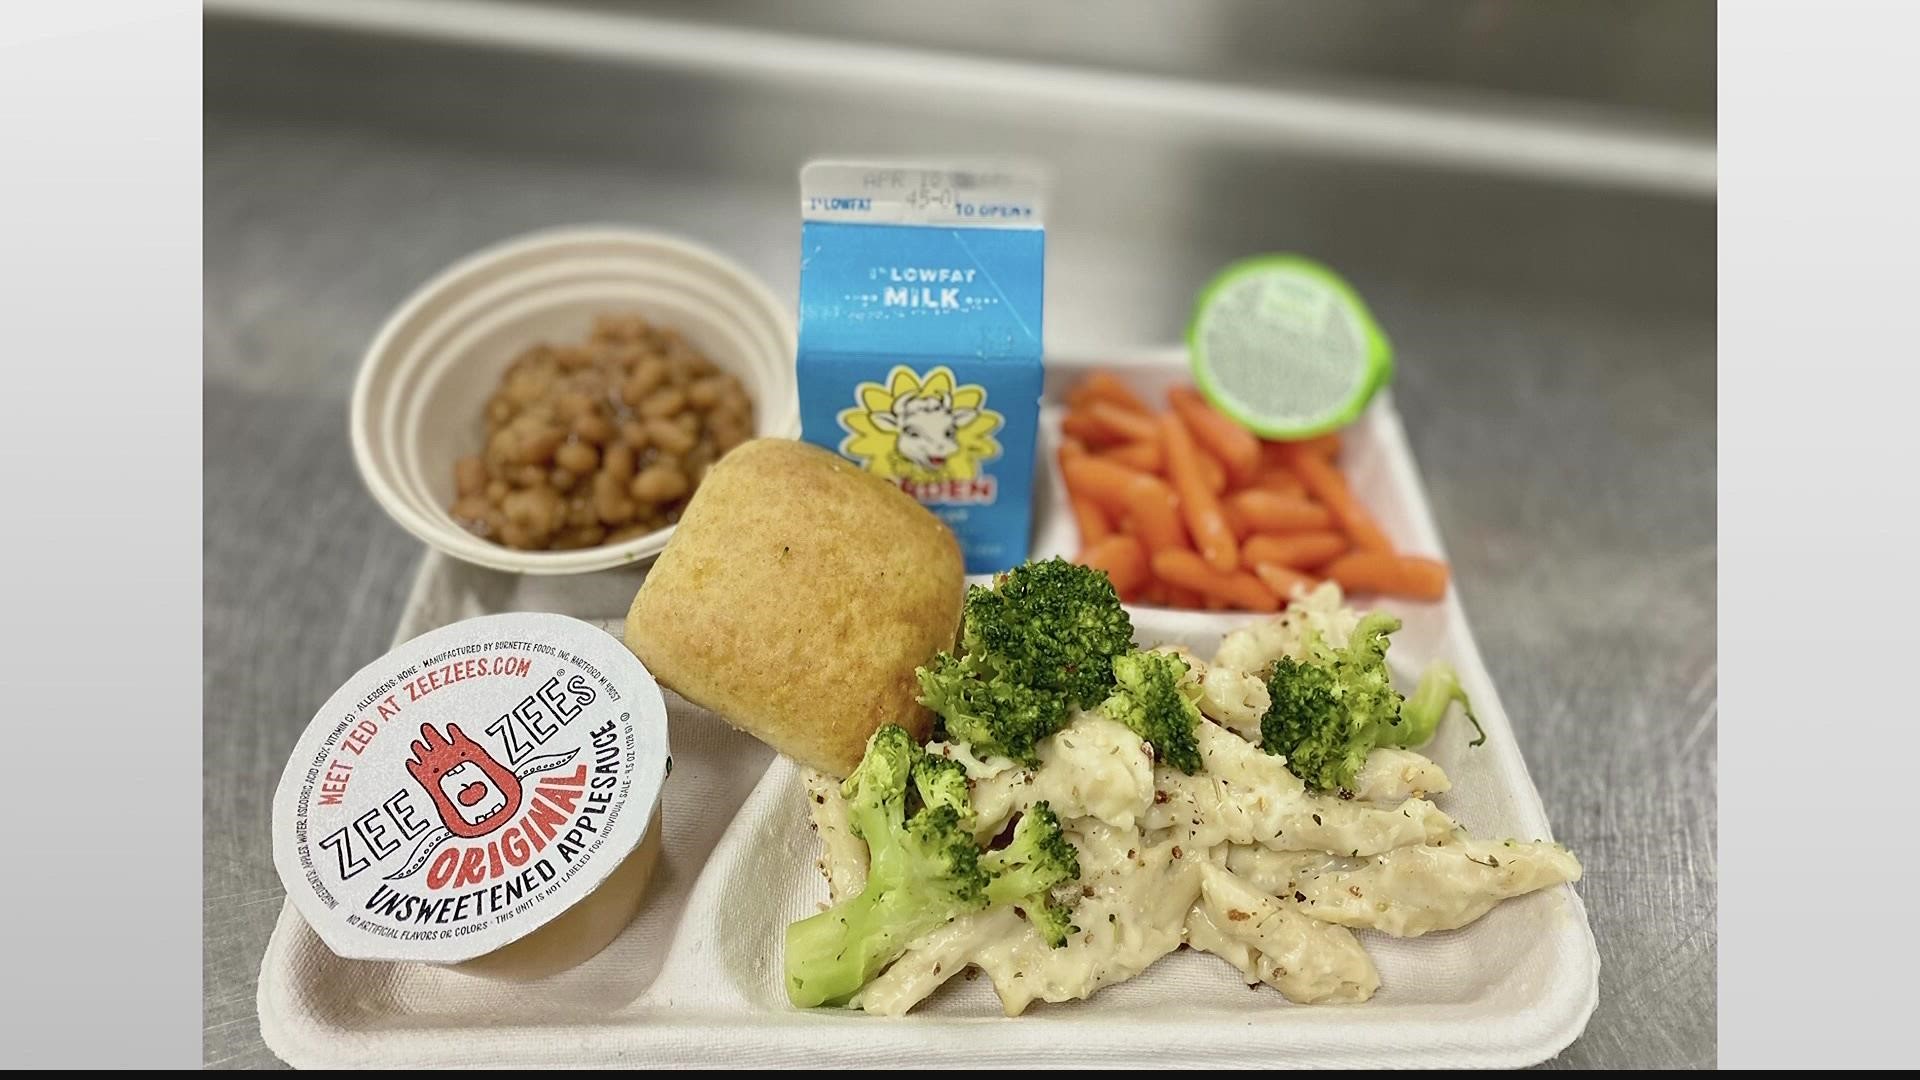 Students can now choose from healthier options.